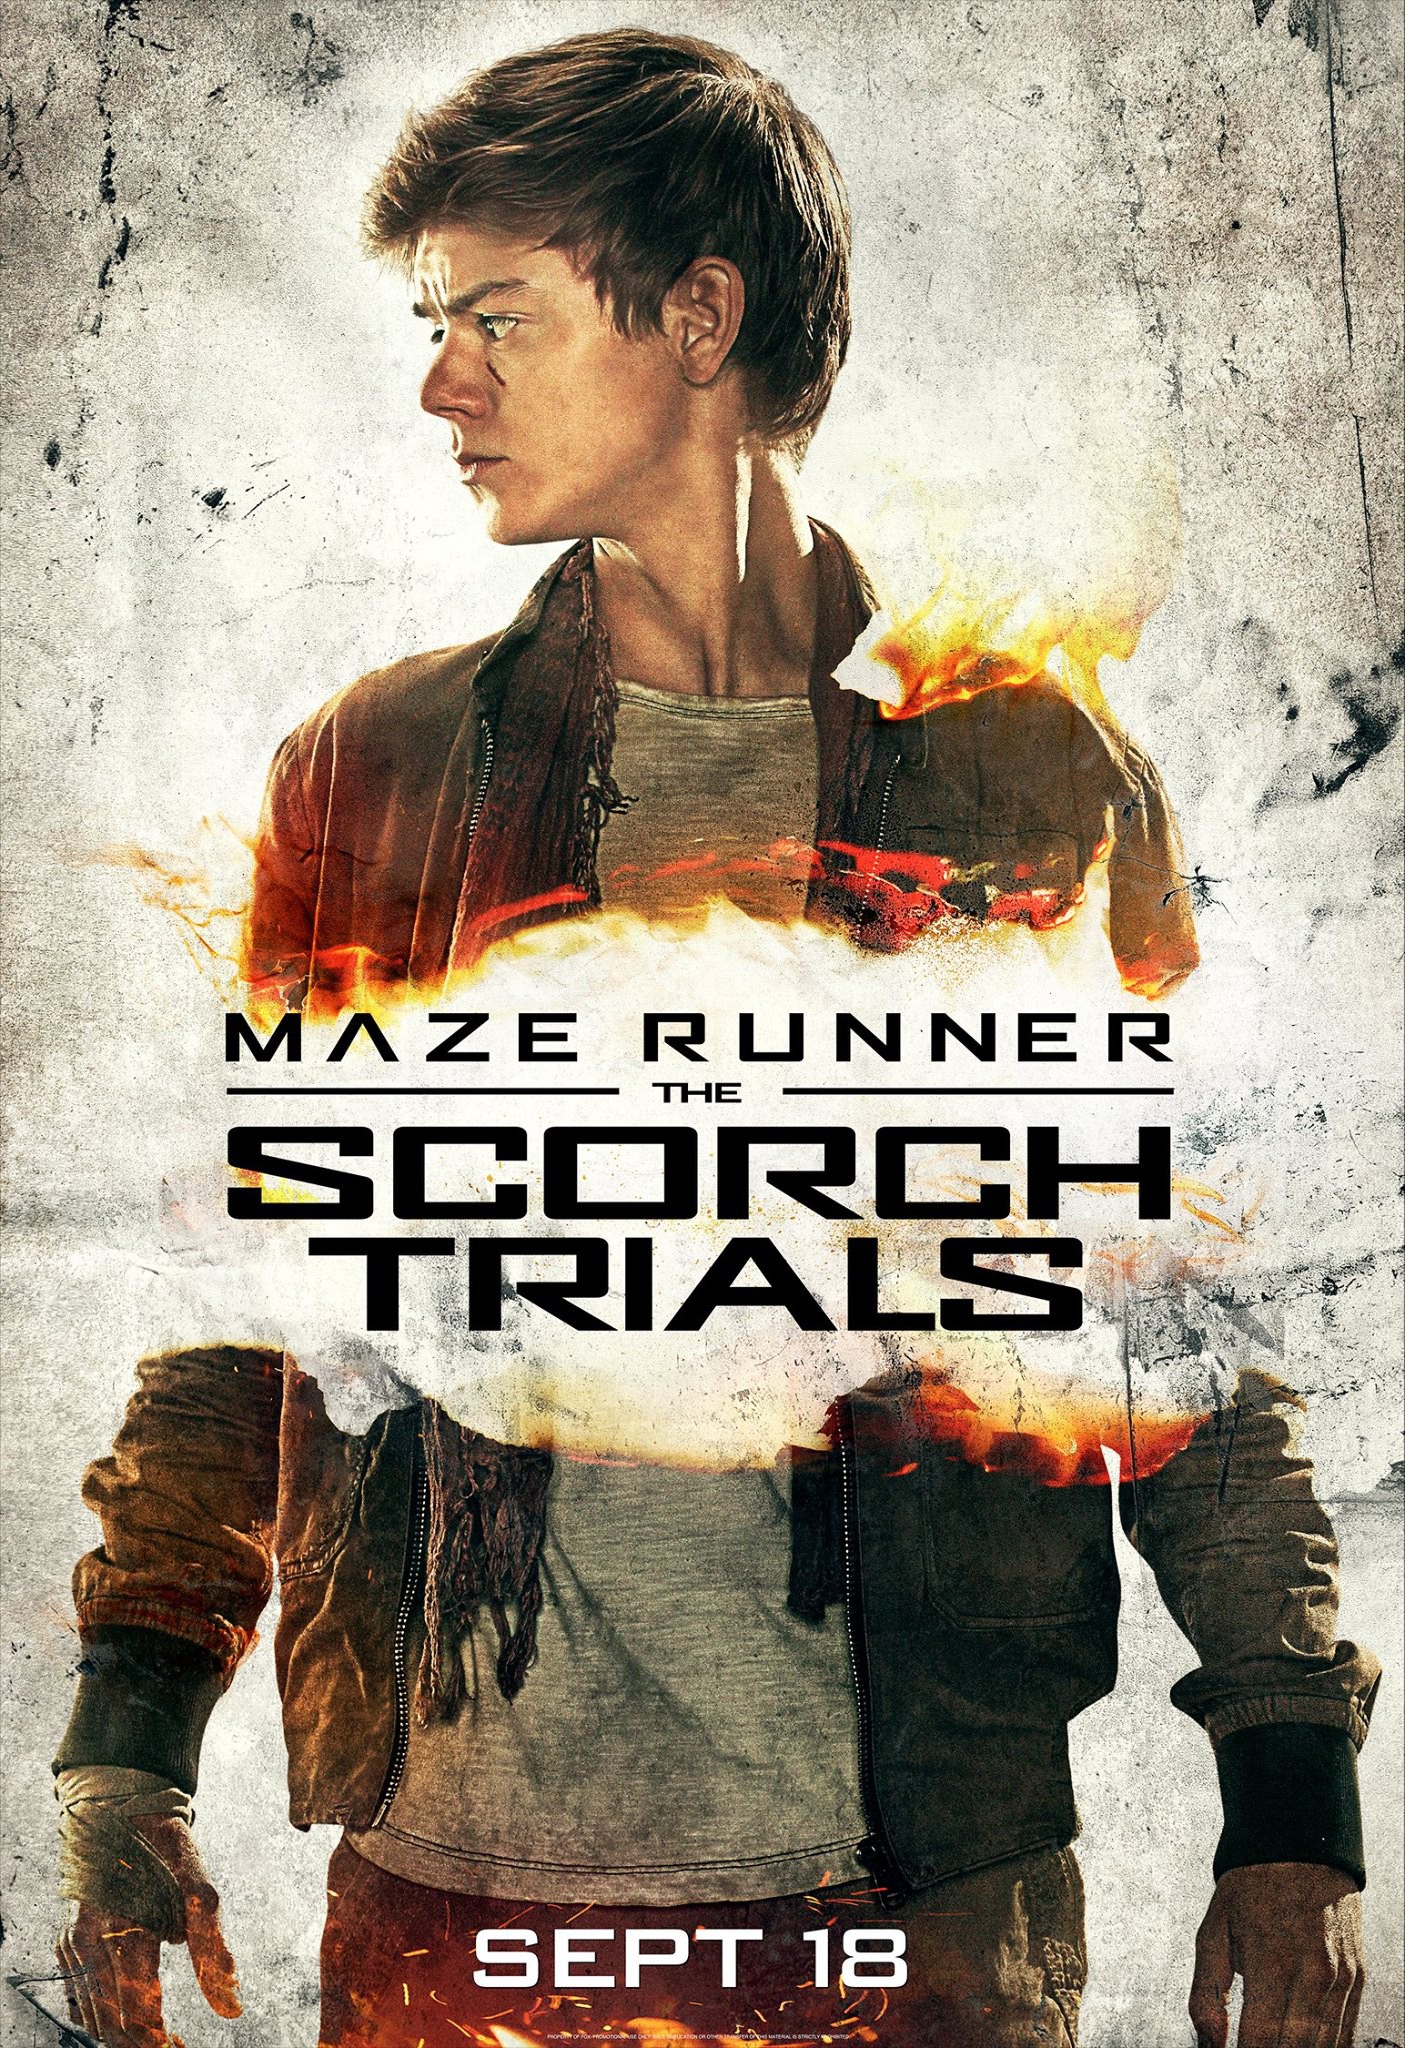 Thomas Brodie-Sangster Maze Runner The Scorch Trials poster